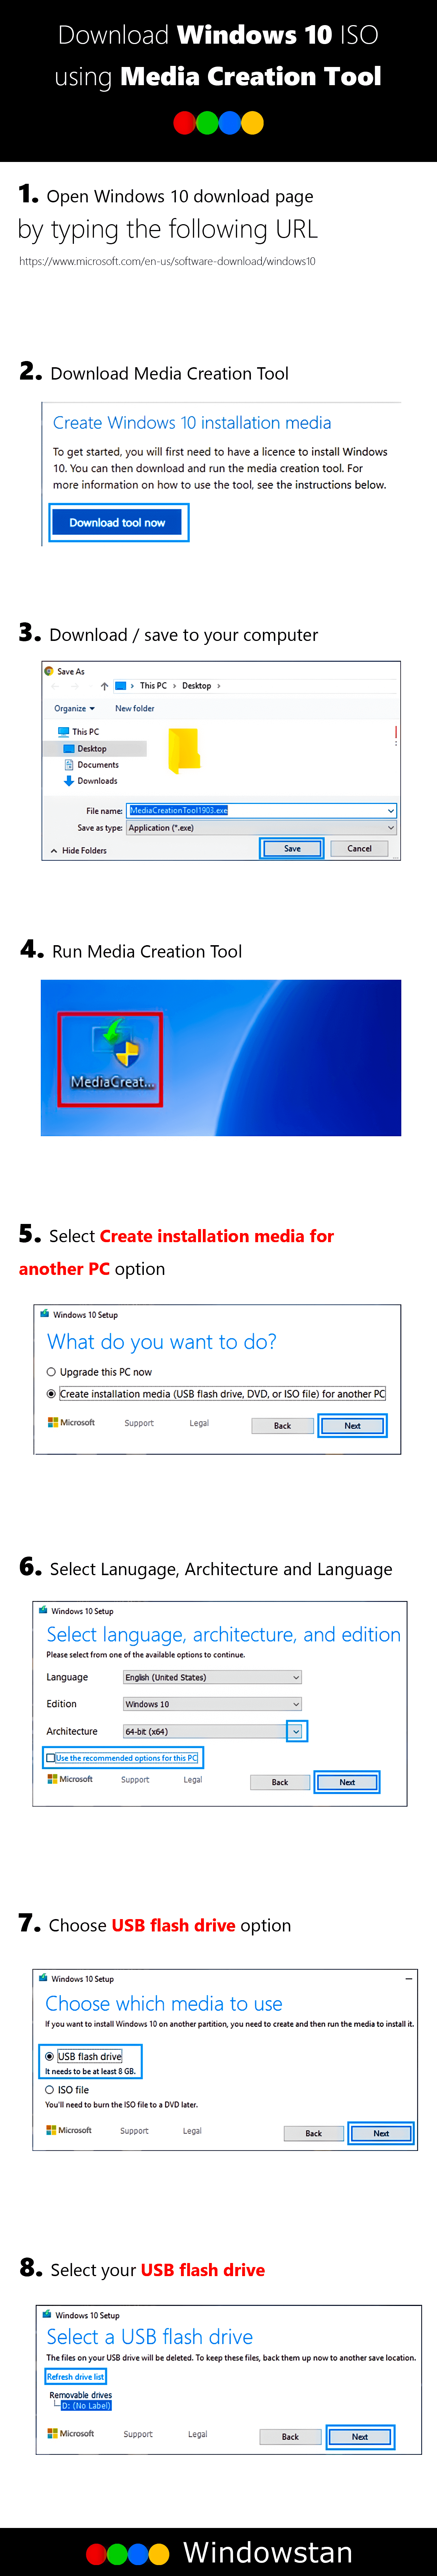 Infographic - Windows 10 ISO download and install using Media Creation Tool